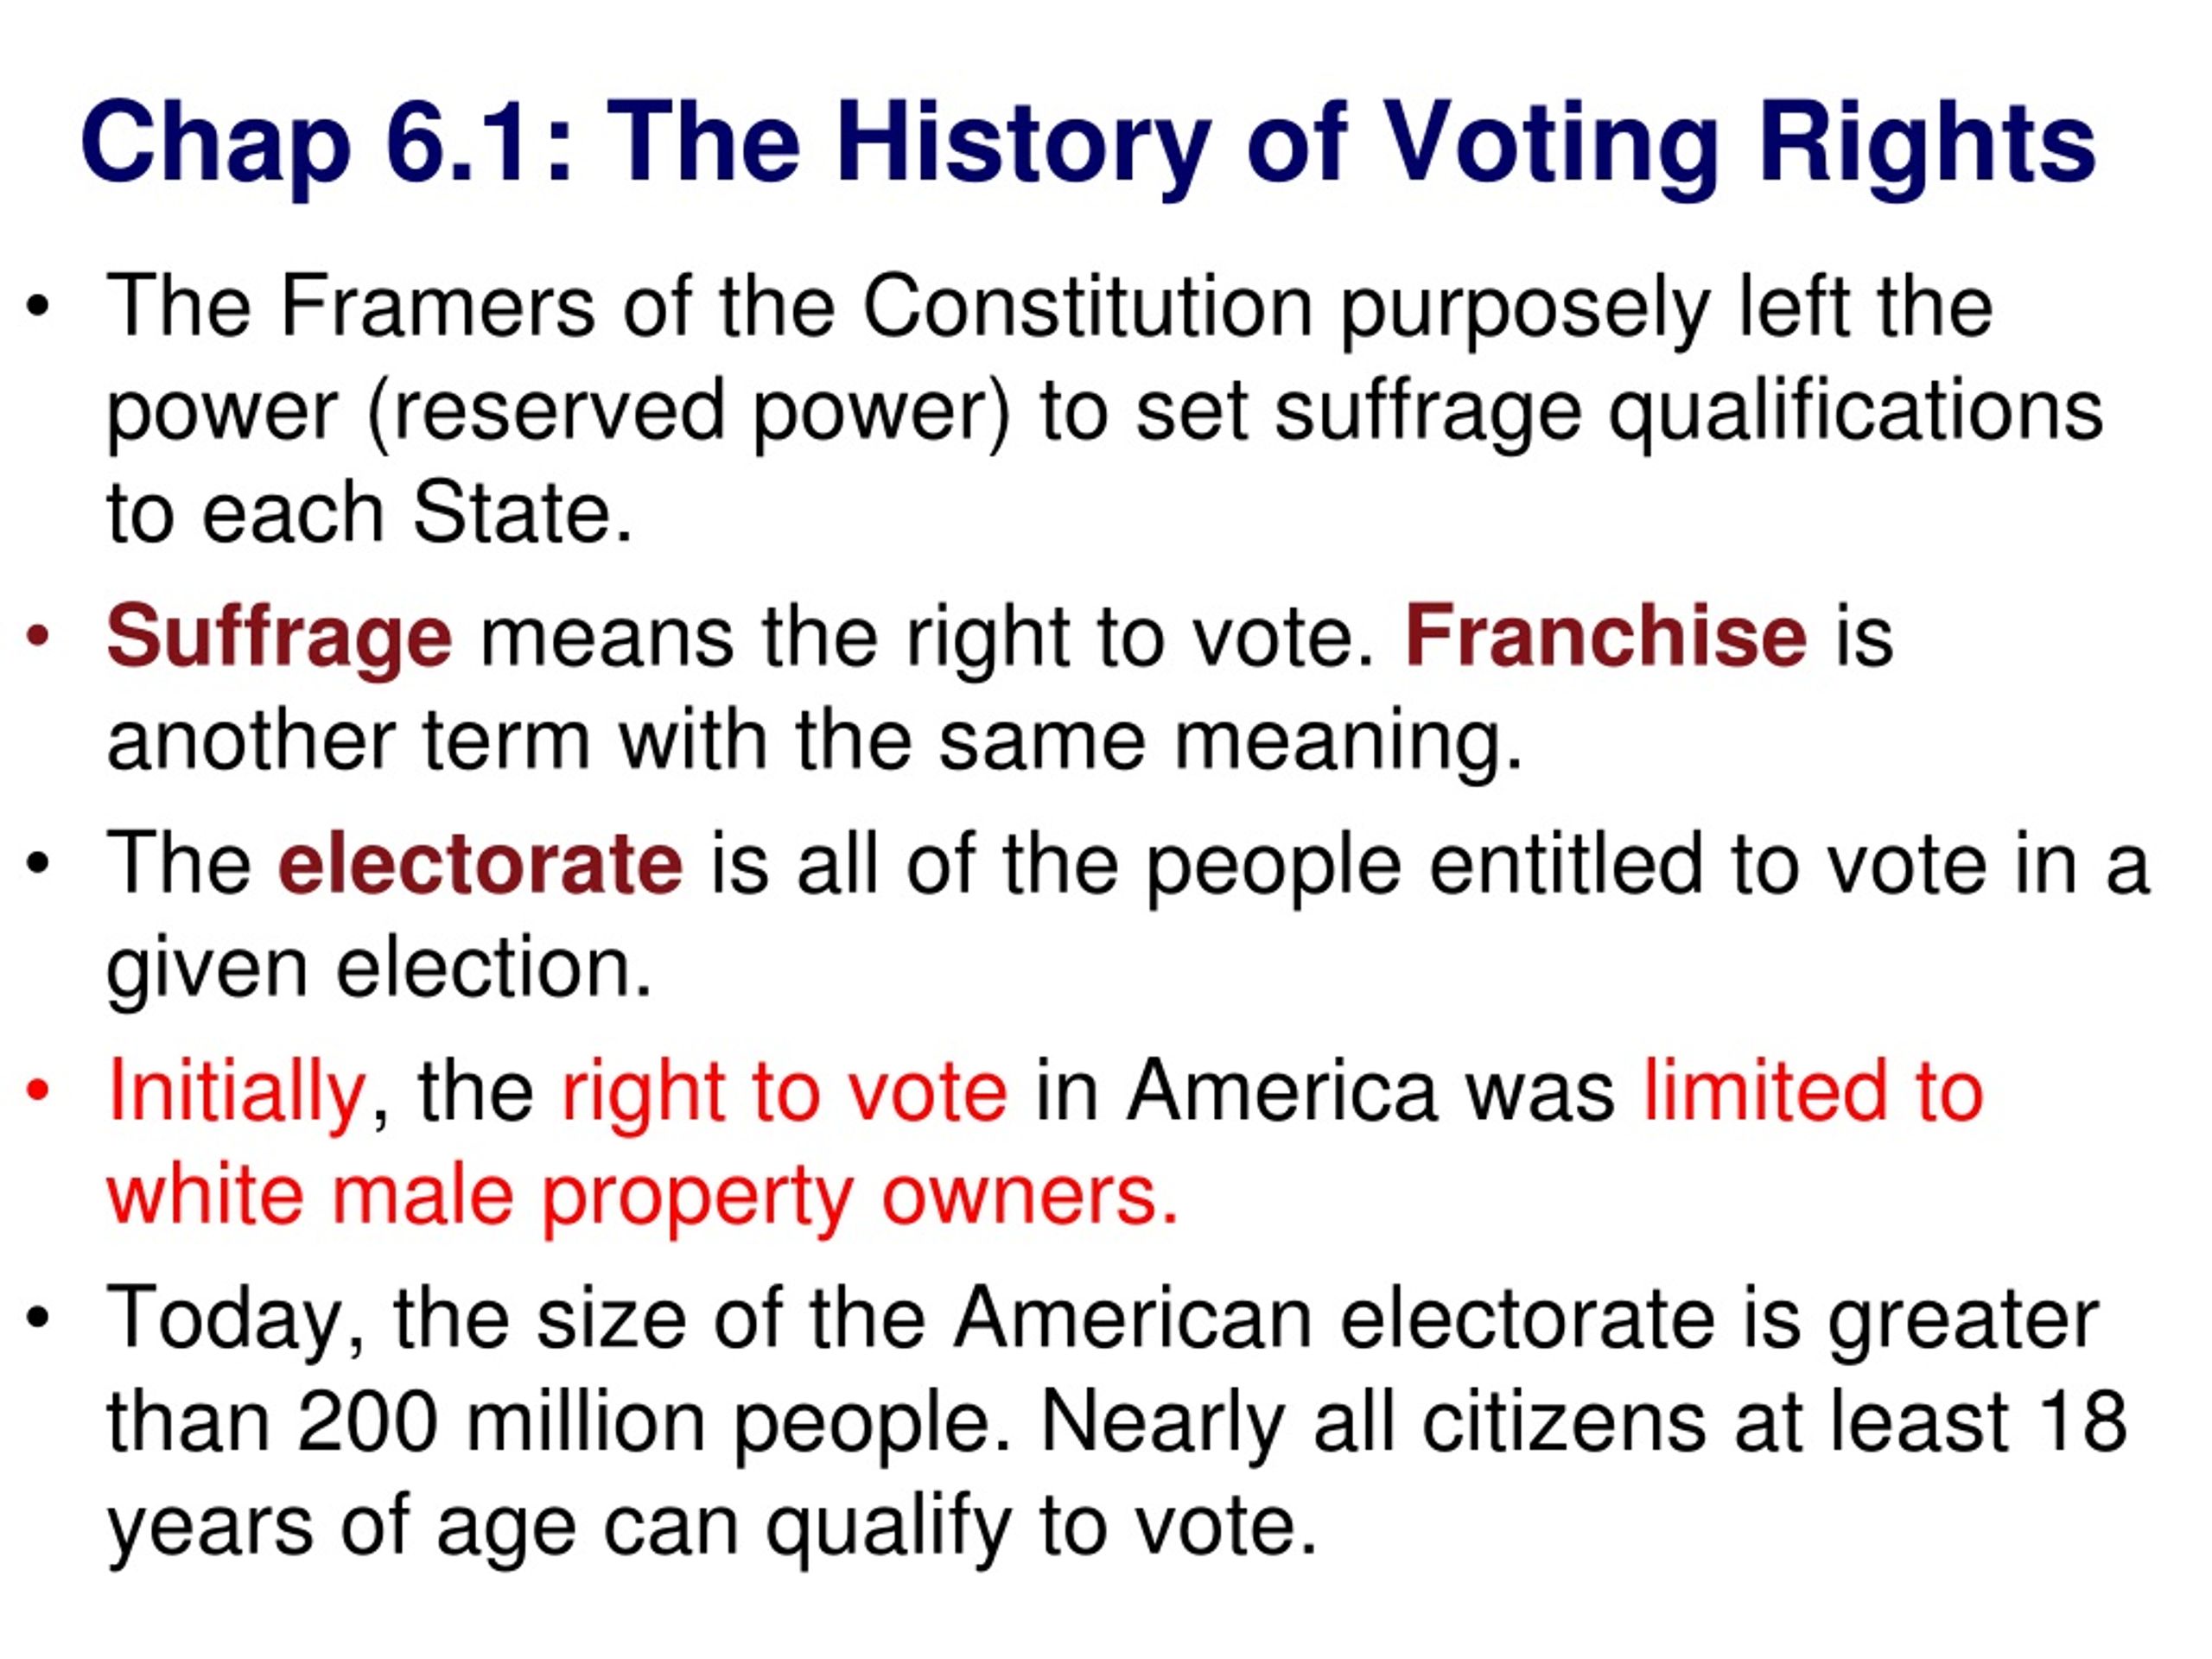 Ppt Chap 61 The History Of Voting Rights Powerpoint Presentation Free Download Id9195265 4225